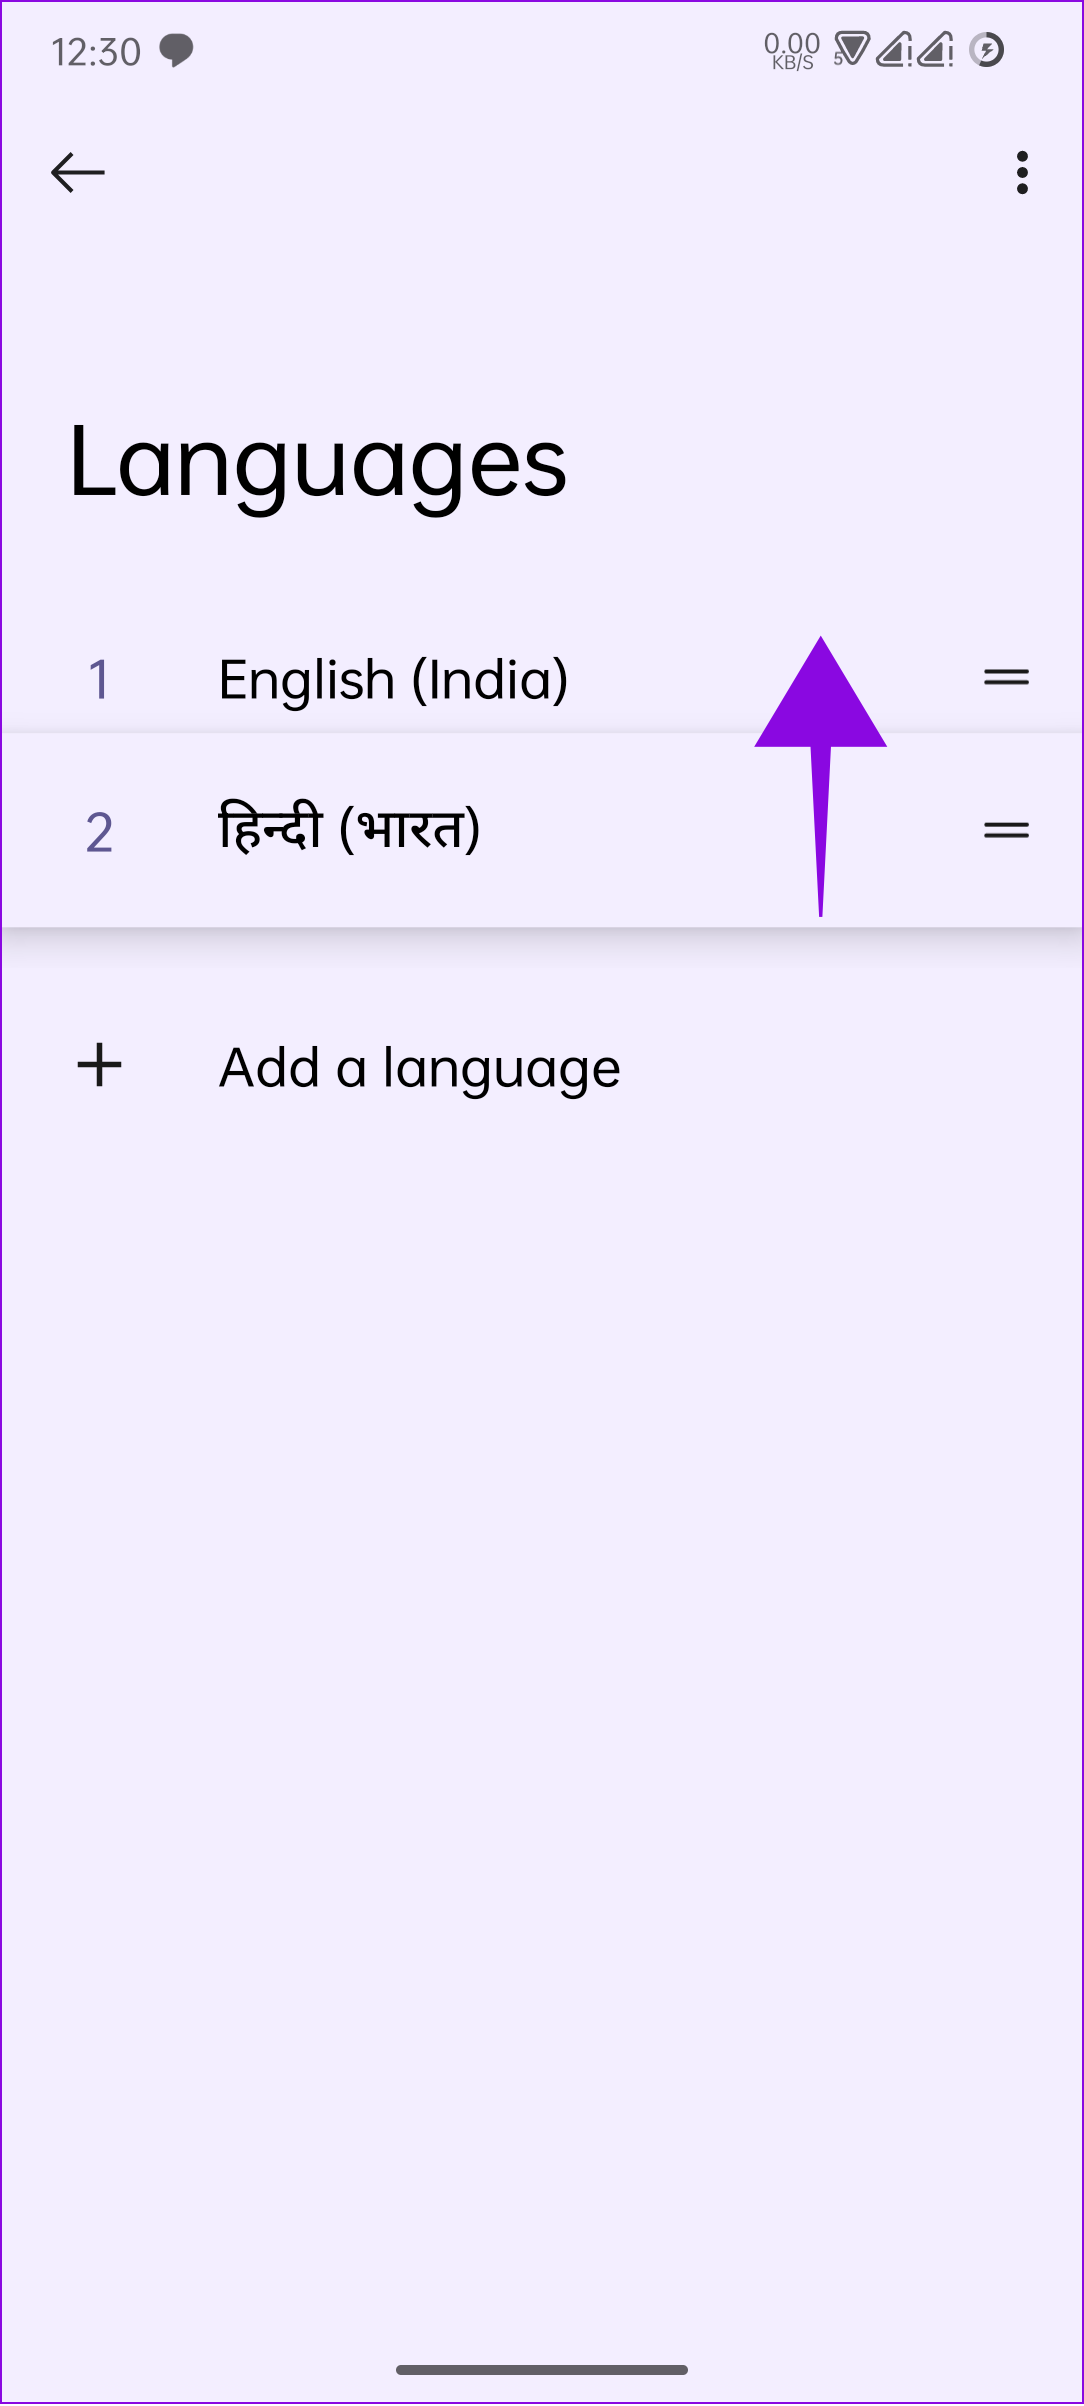 tap and drag the language to the top